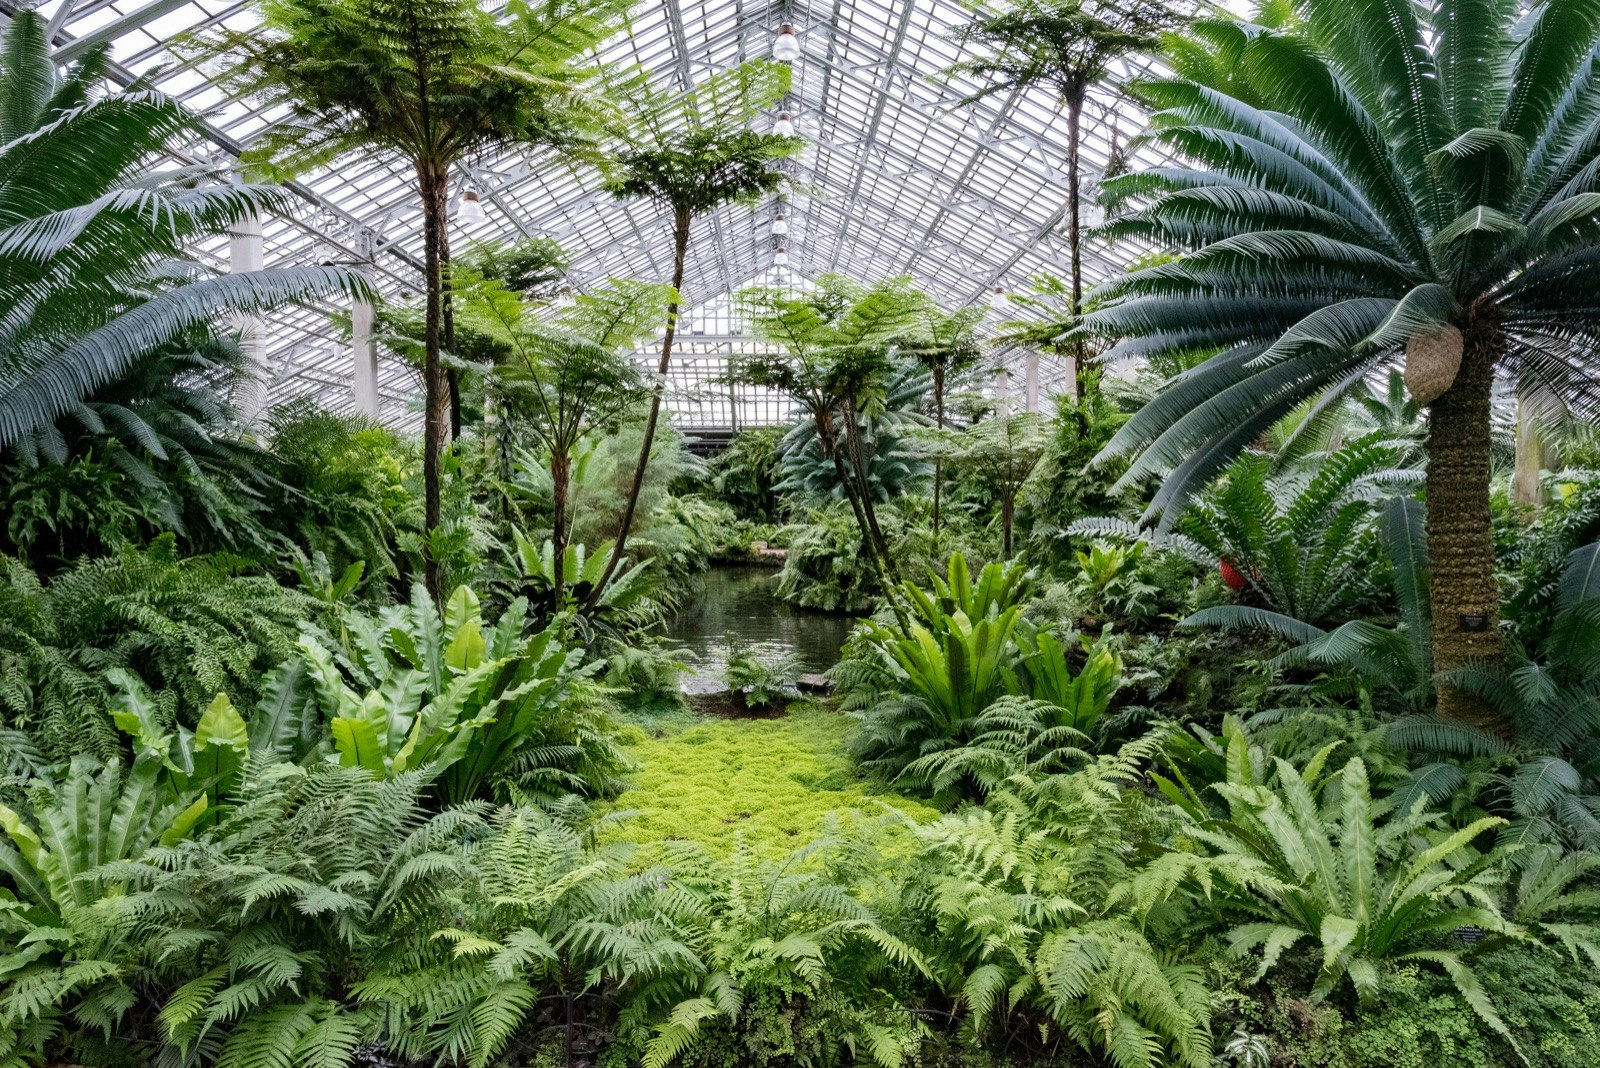 An indoor greenhouse filled with a jungle of green plants